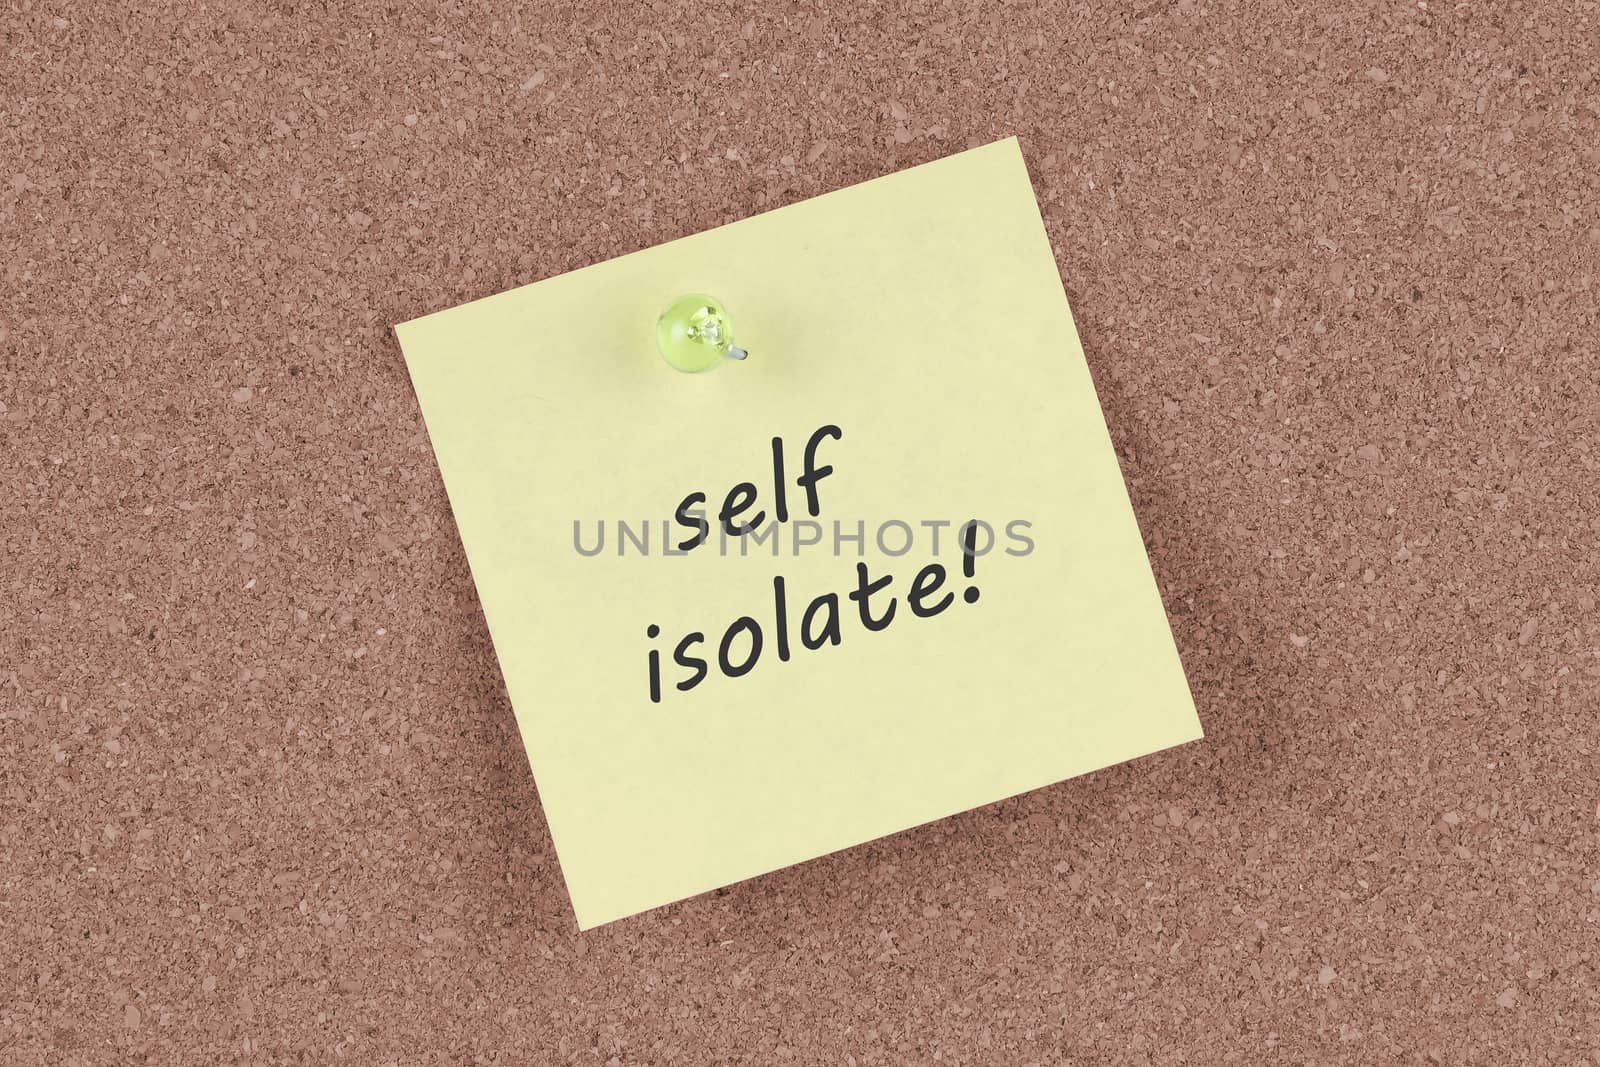 A self isolate post note on a cork notice board